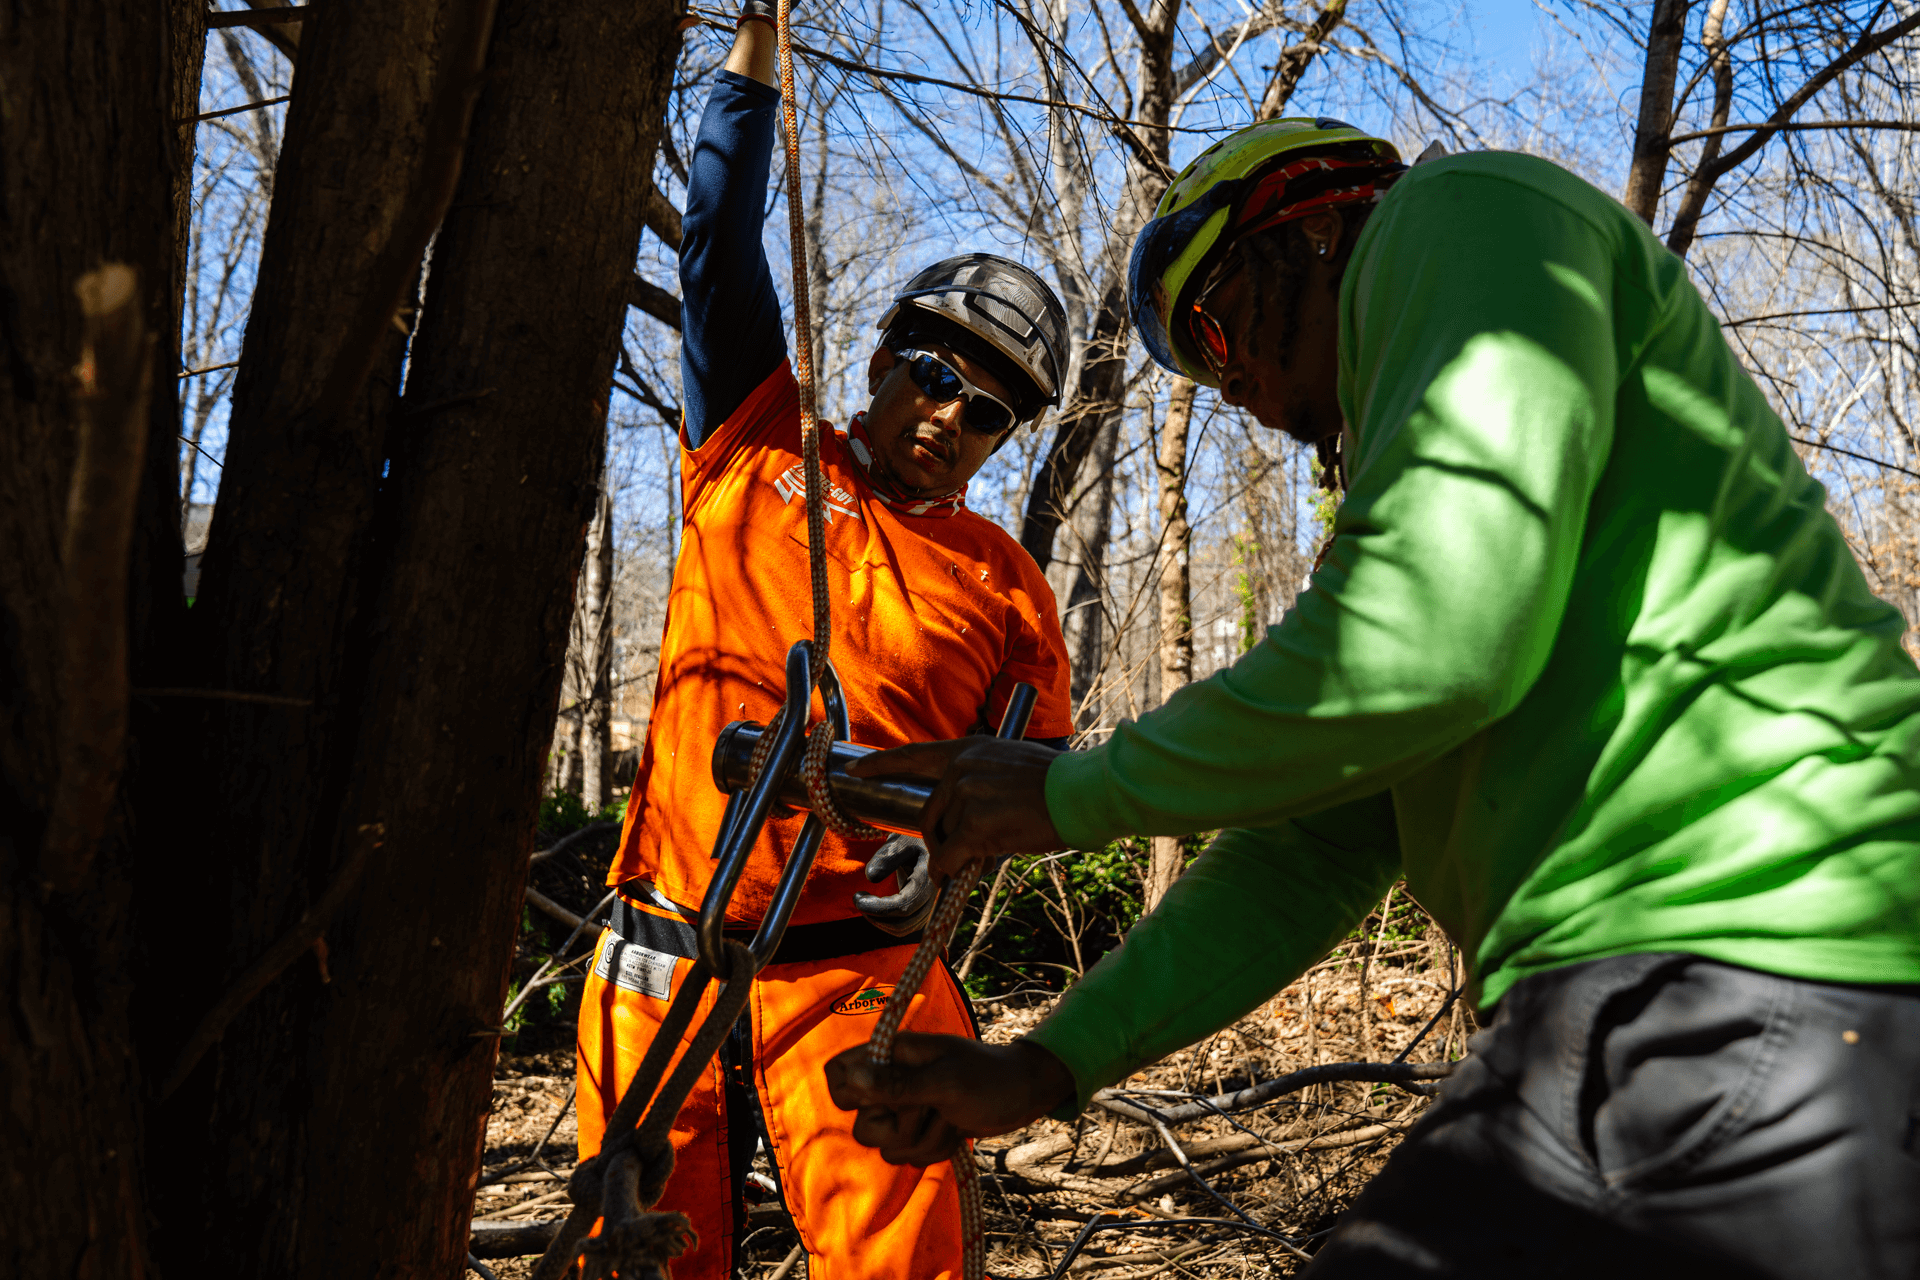 Looking for top-notch tree care services? Discover how to find the best arborist near you.